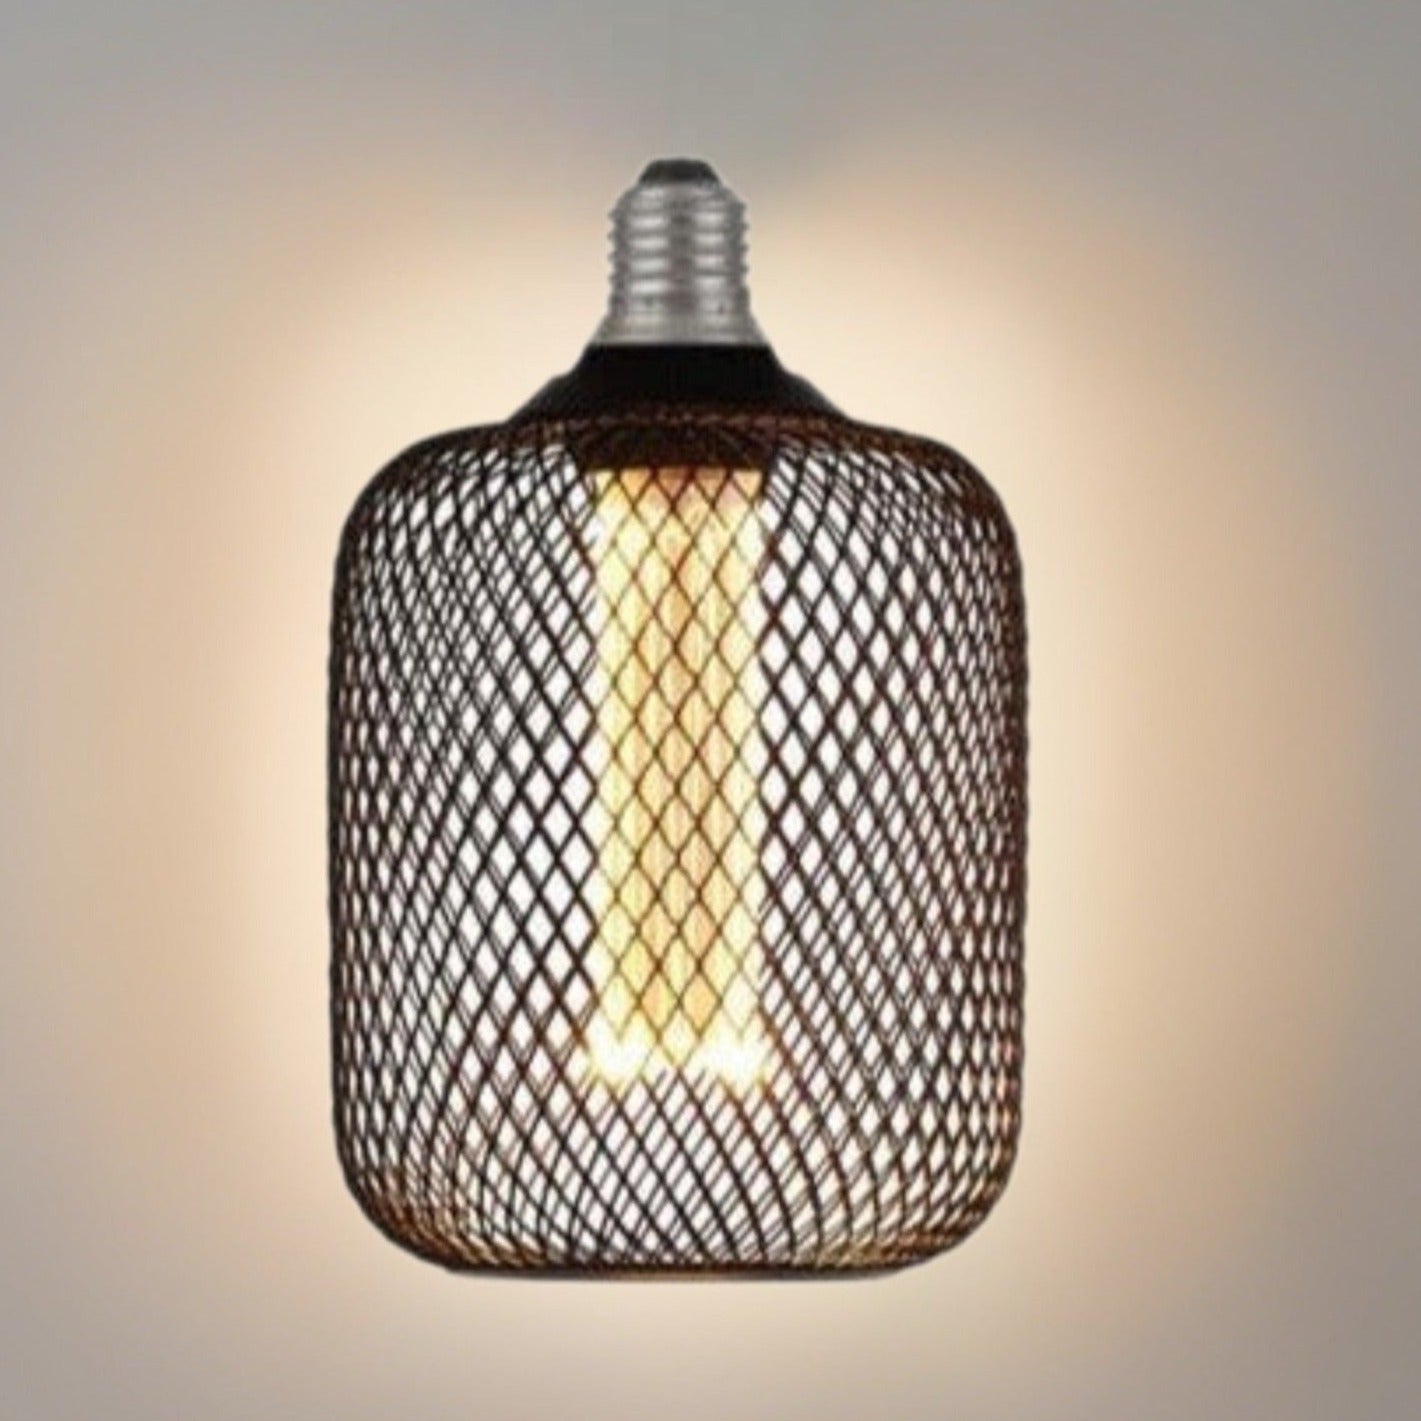 Our decorative black mesh E27 LED drum bulb provides a unique aesthetic, blending seamlessly into many decors. Made from black wire mesh in drum cross hatch pattern giving this bulb a real industrial feel. This energy-saving bulb is perfect for exposed lighting designs fits any standard E27 lamp holder.